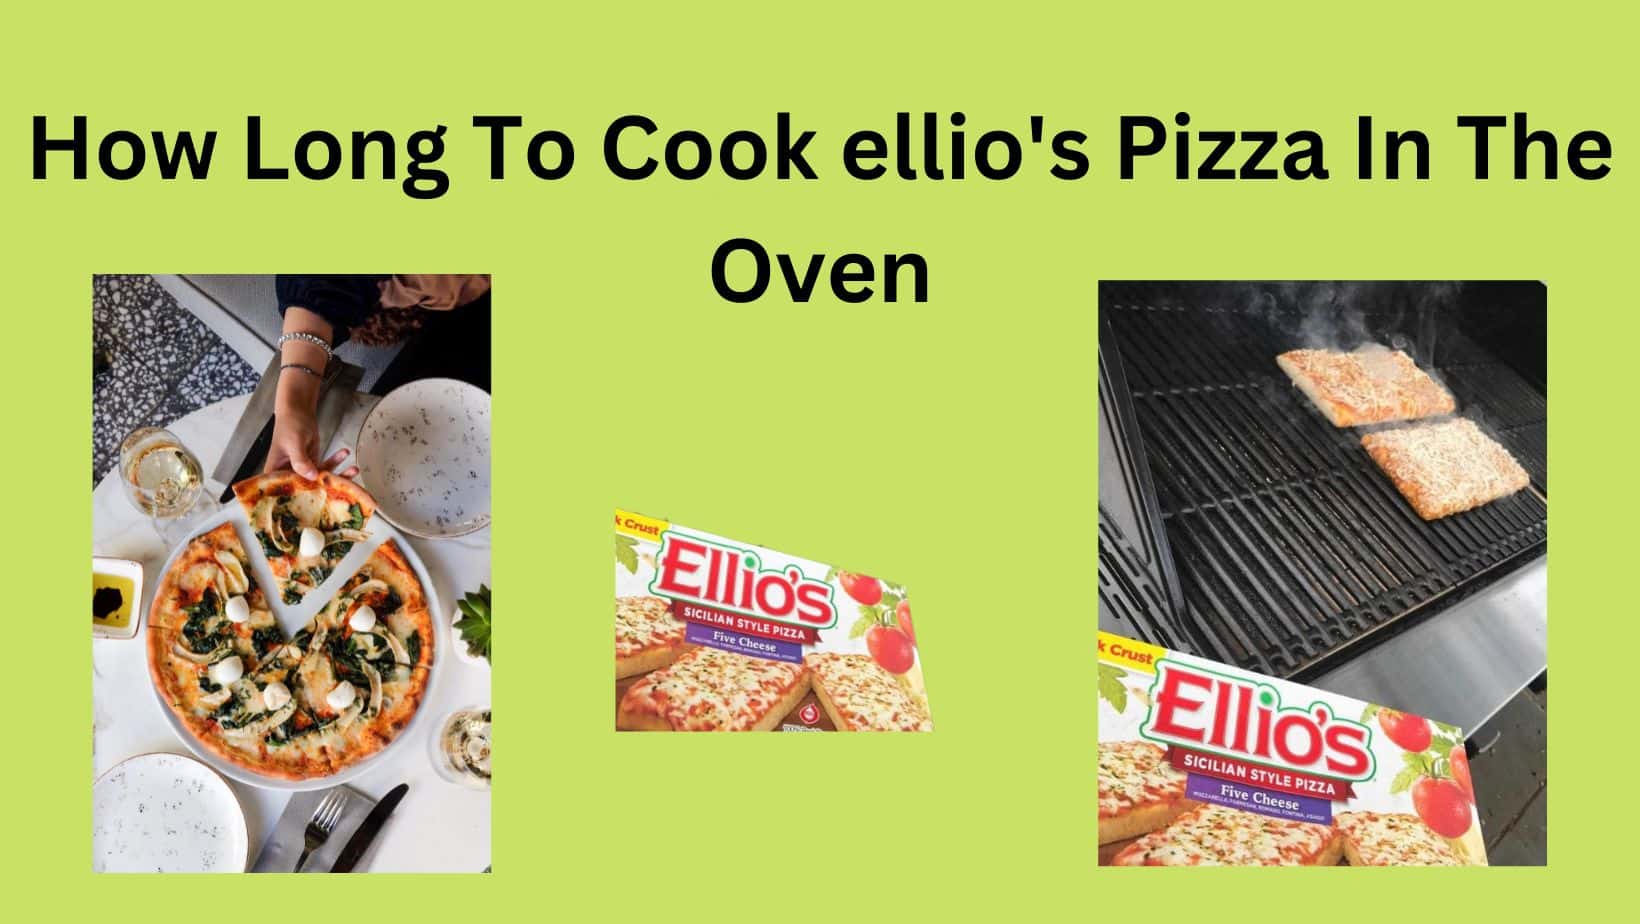 how long to cook ellio's pizza in the oven